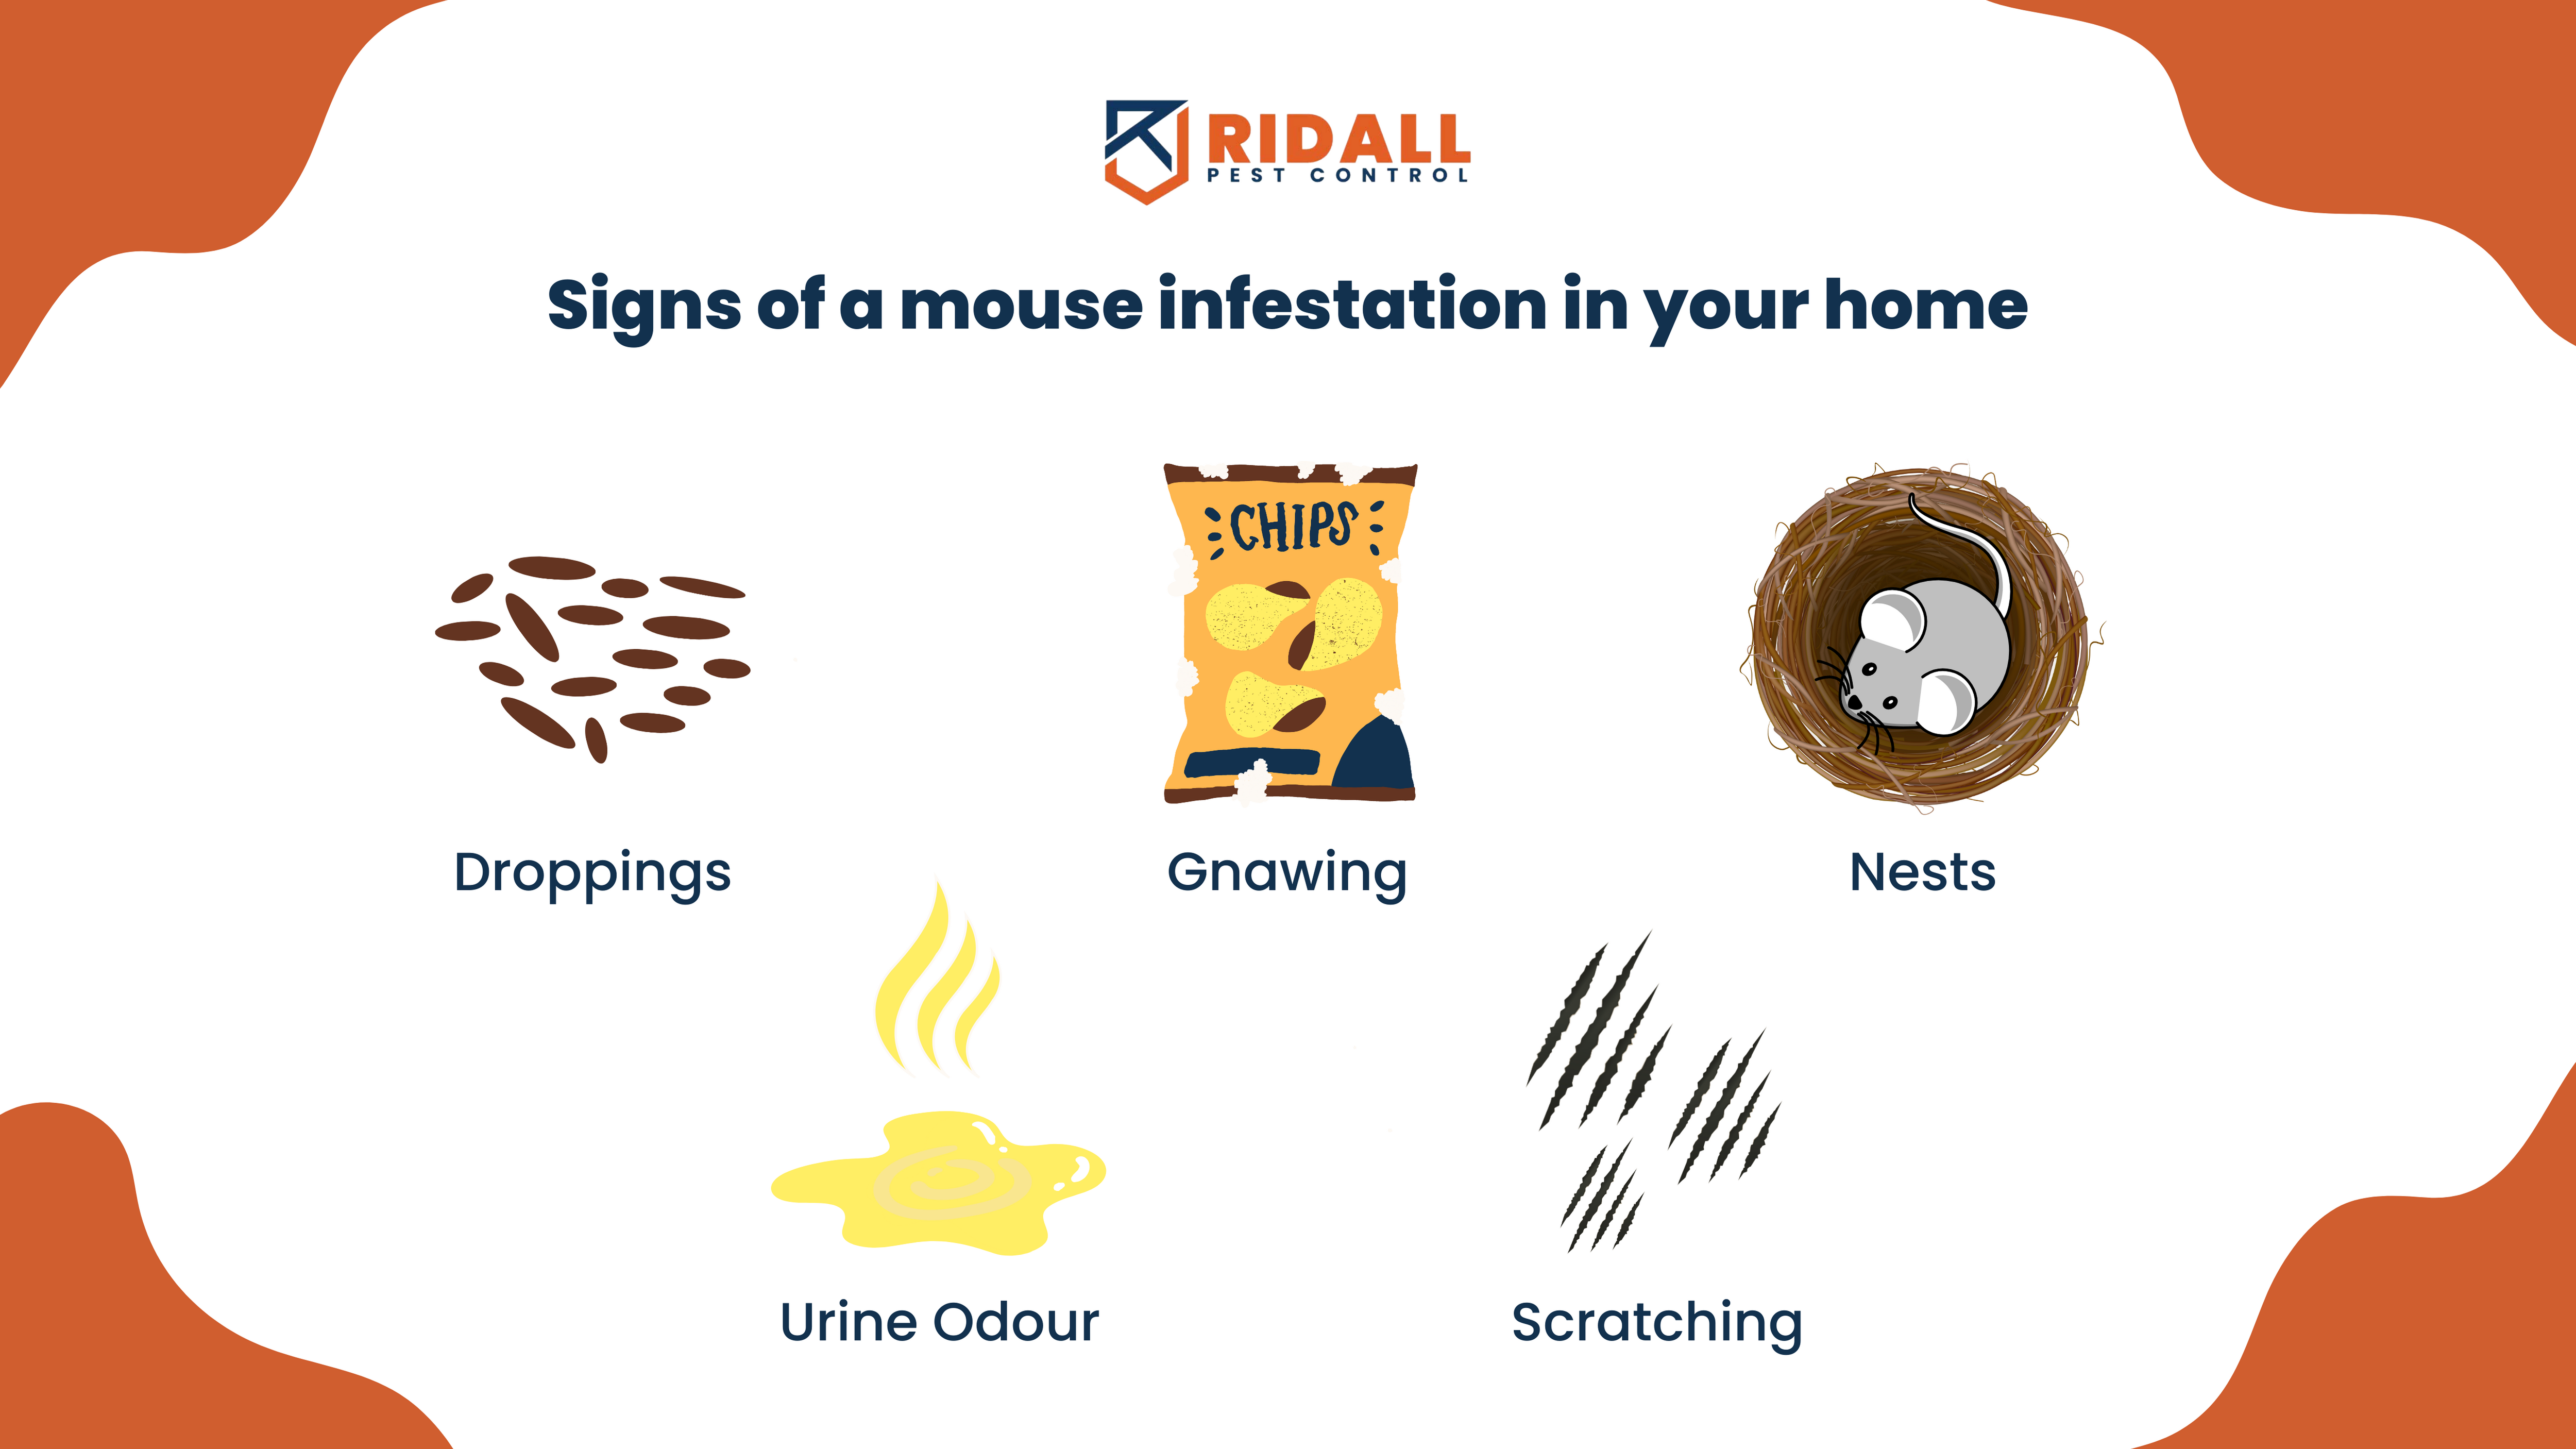 Signs of a mouse infestation in your home